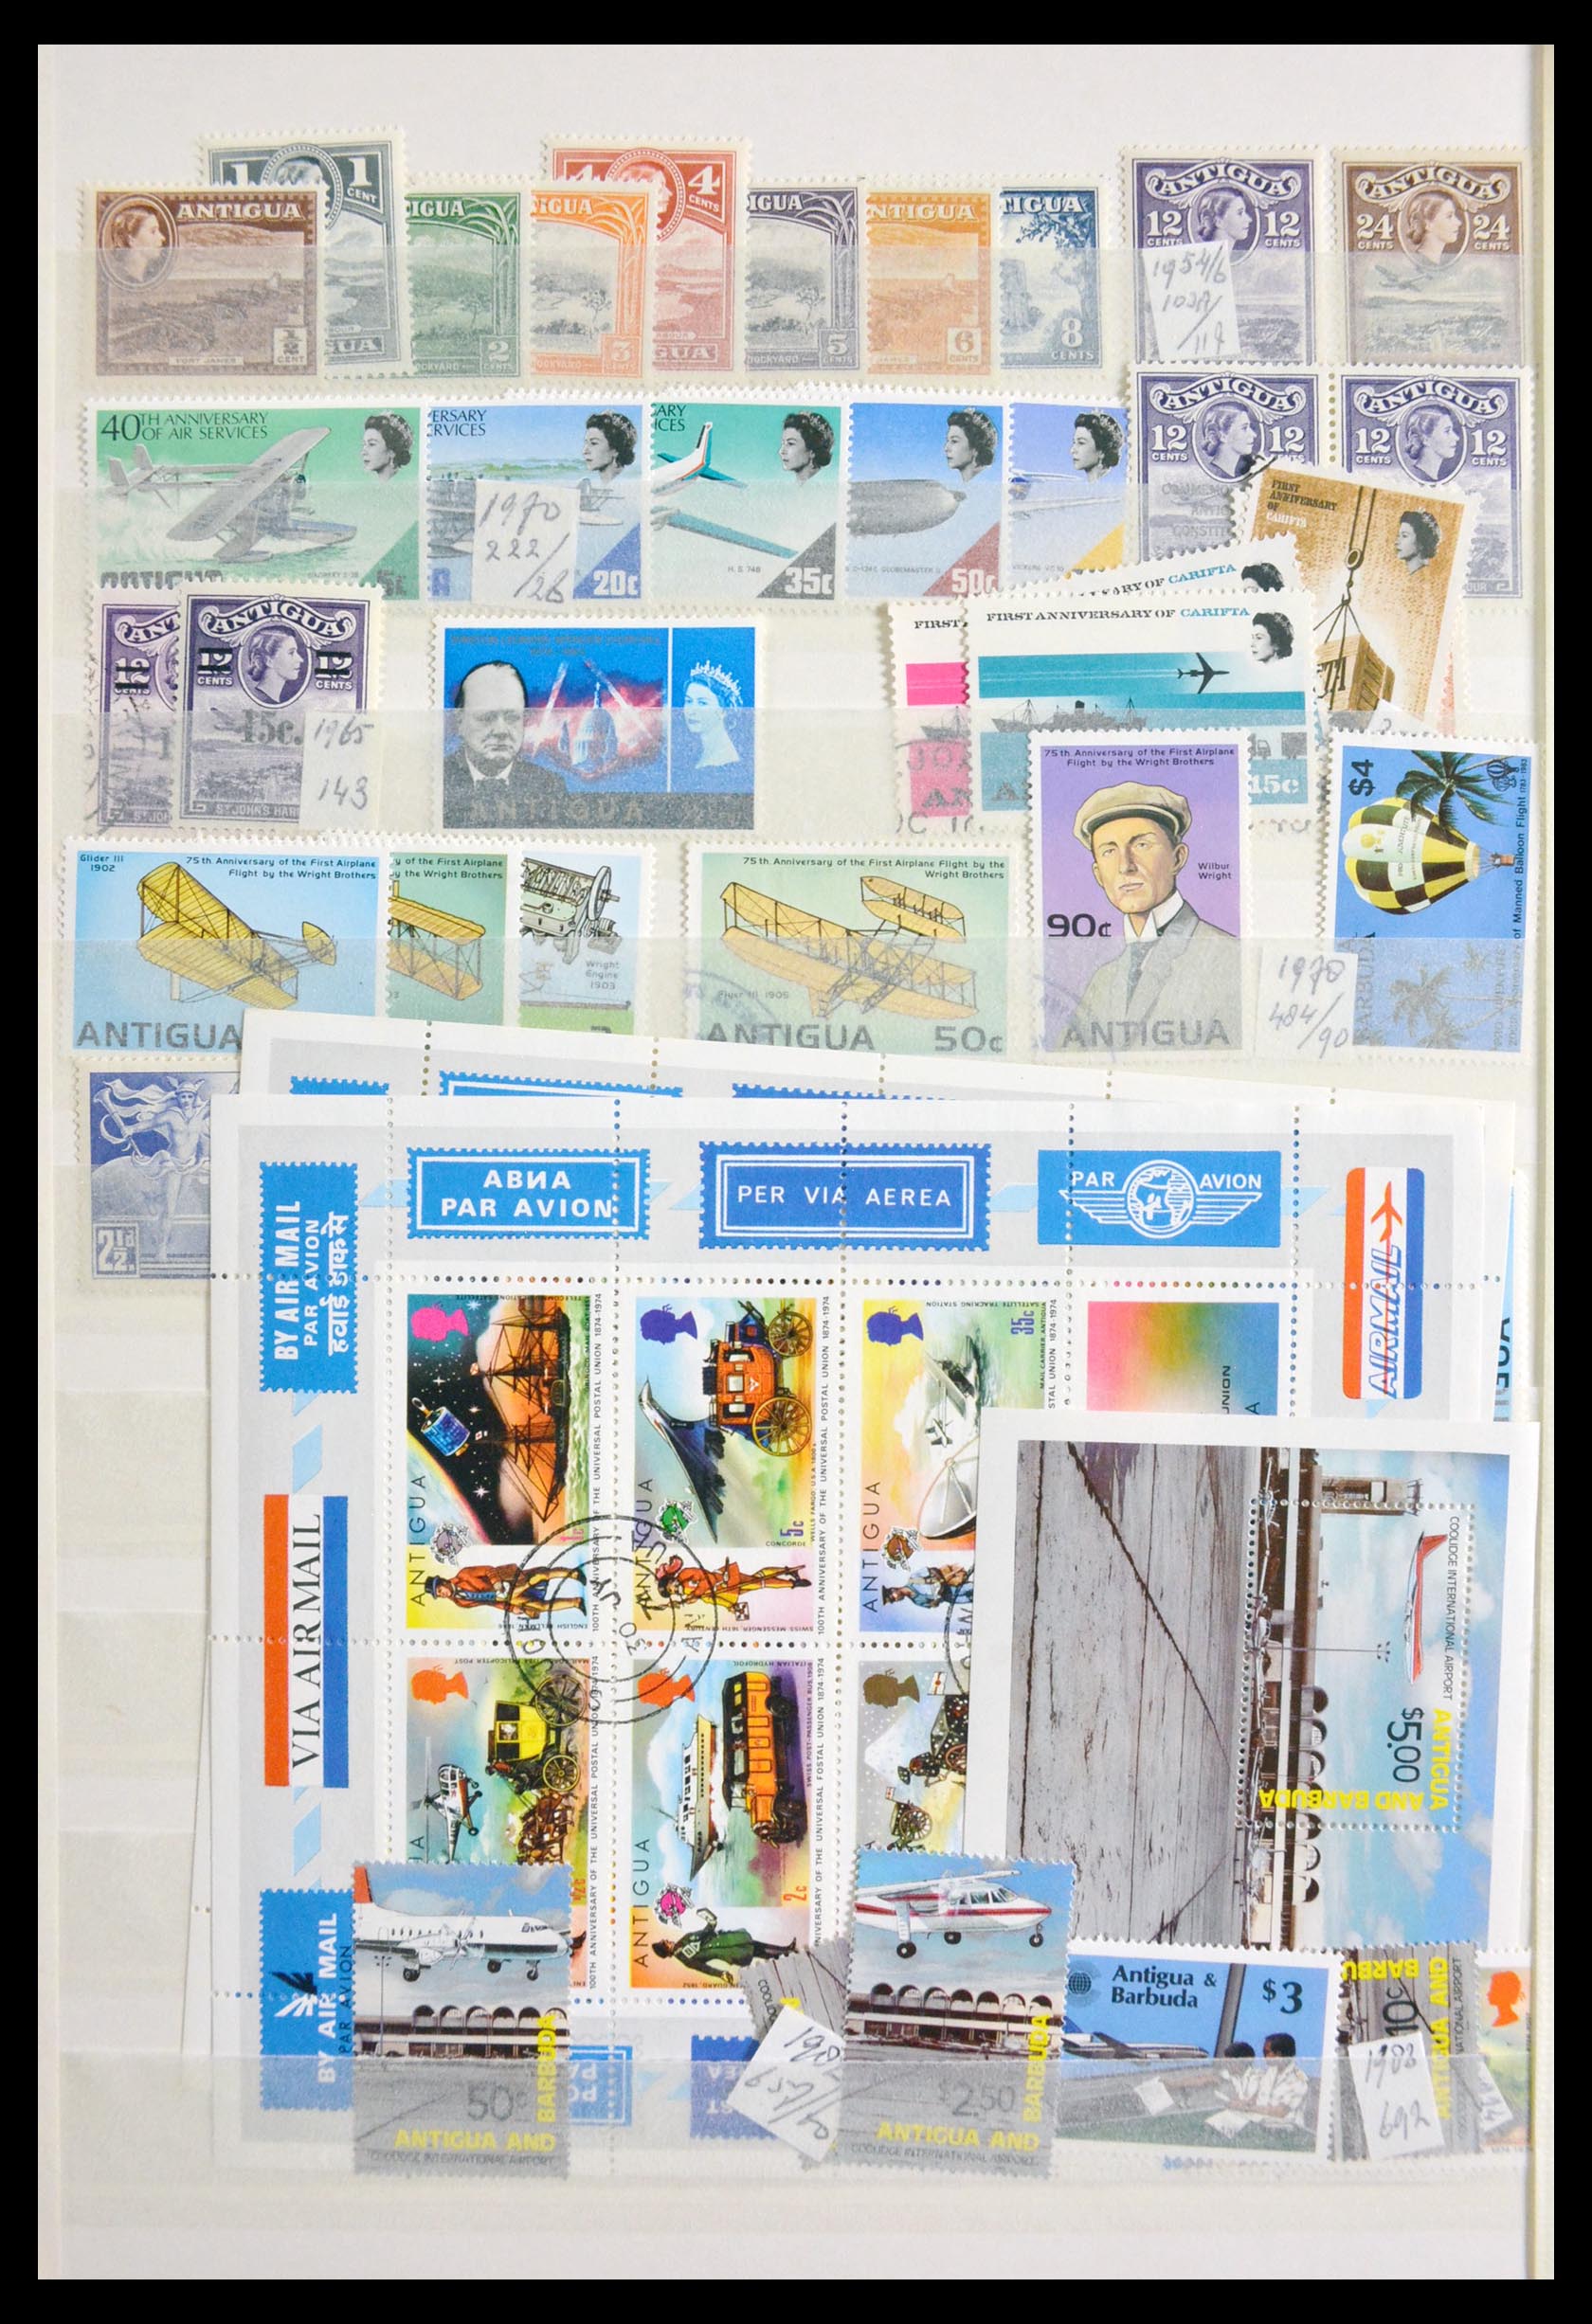 29917 012 - 29917 Latin America airmail stamps.